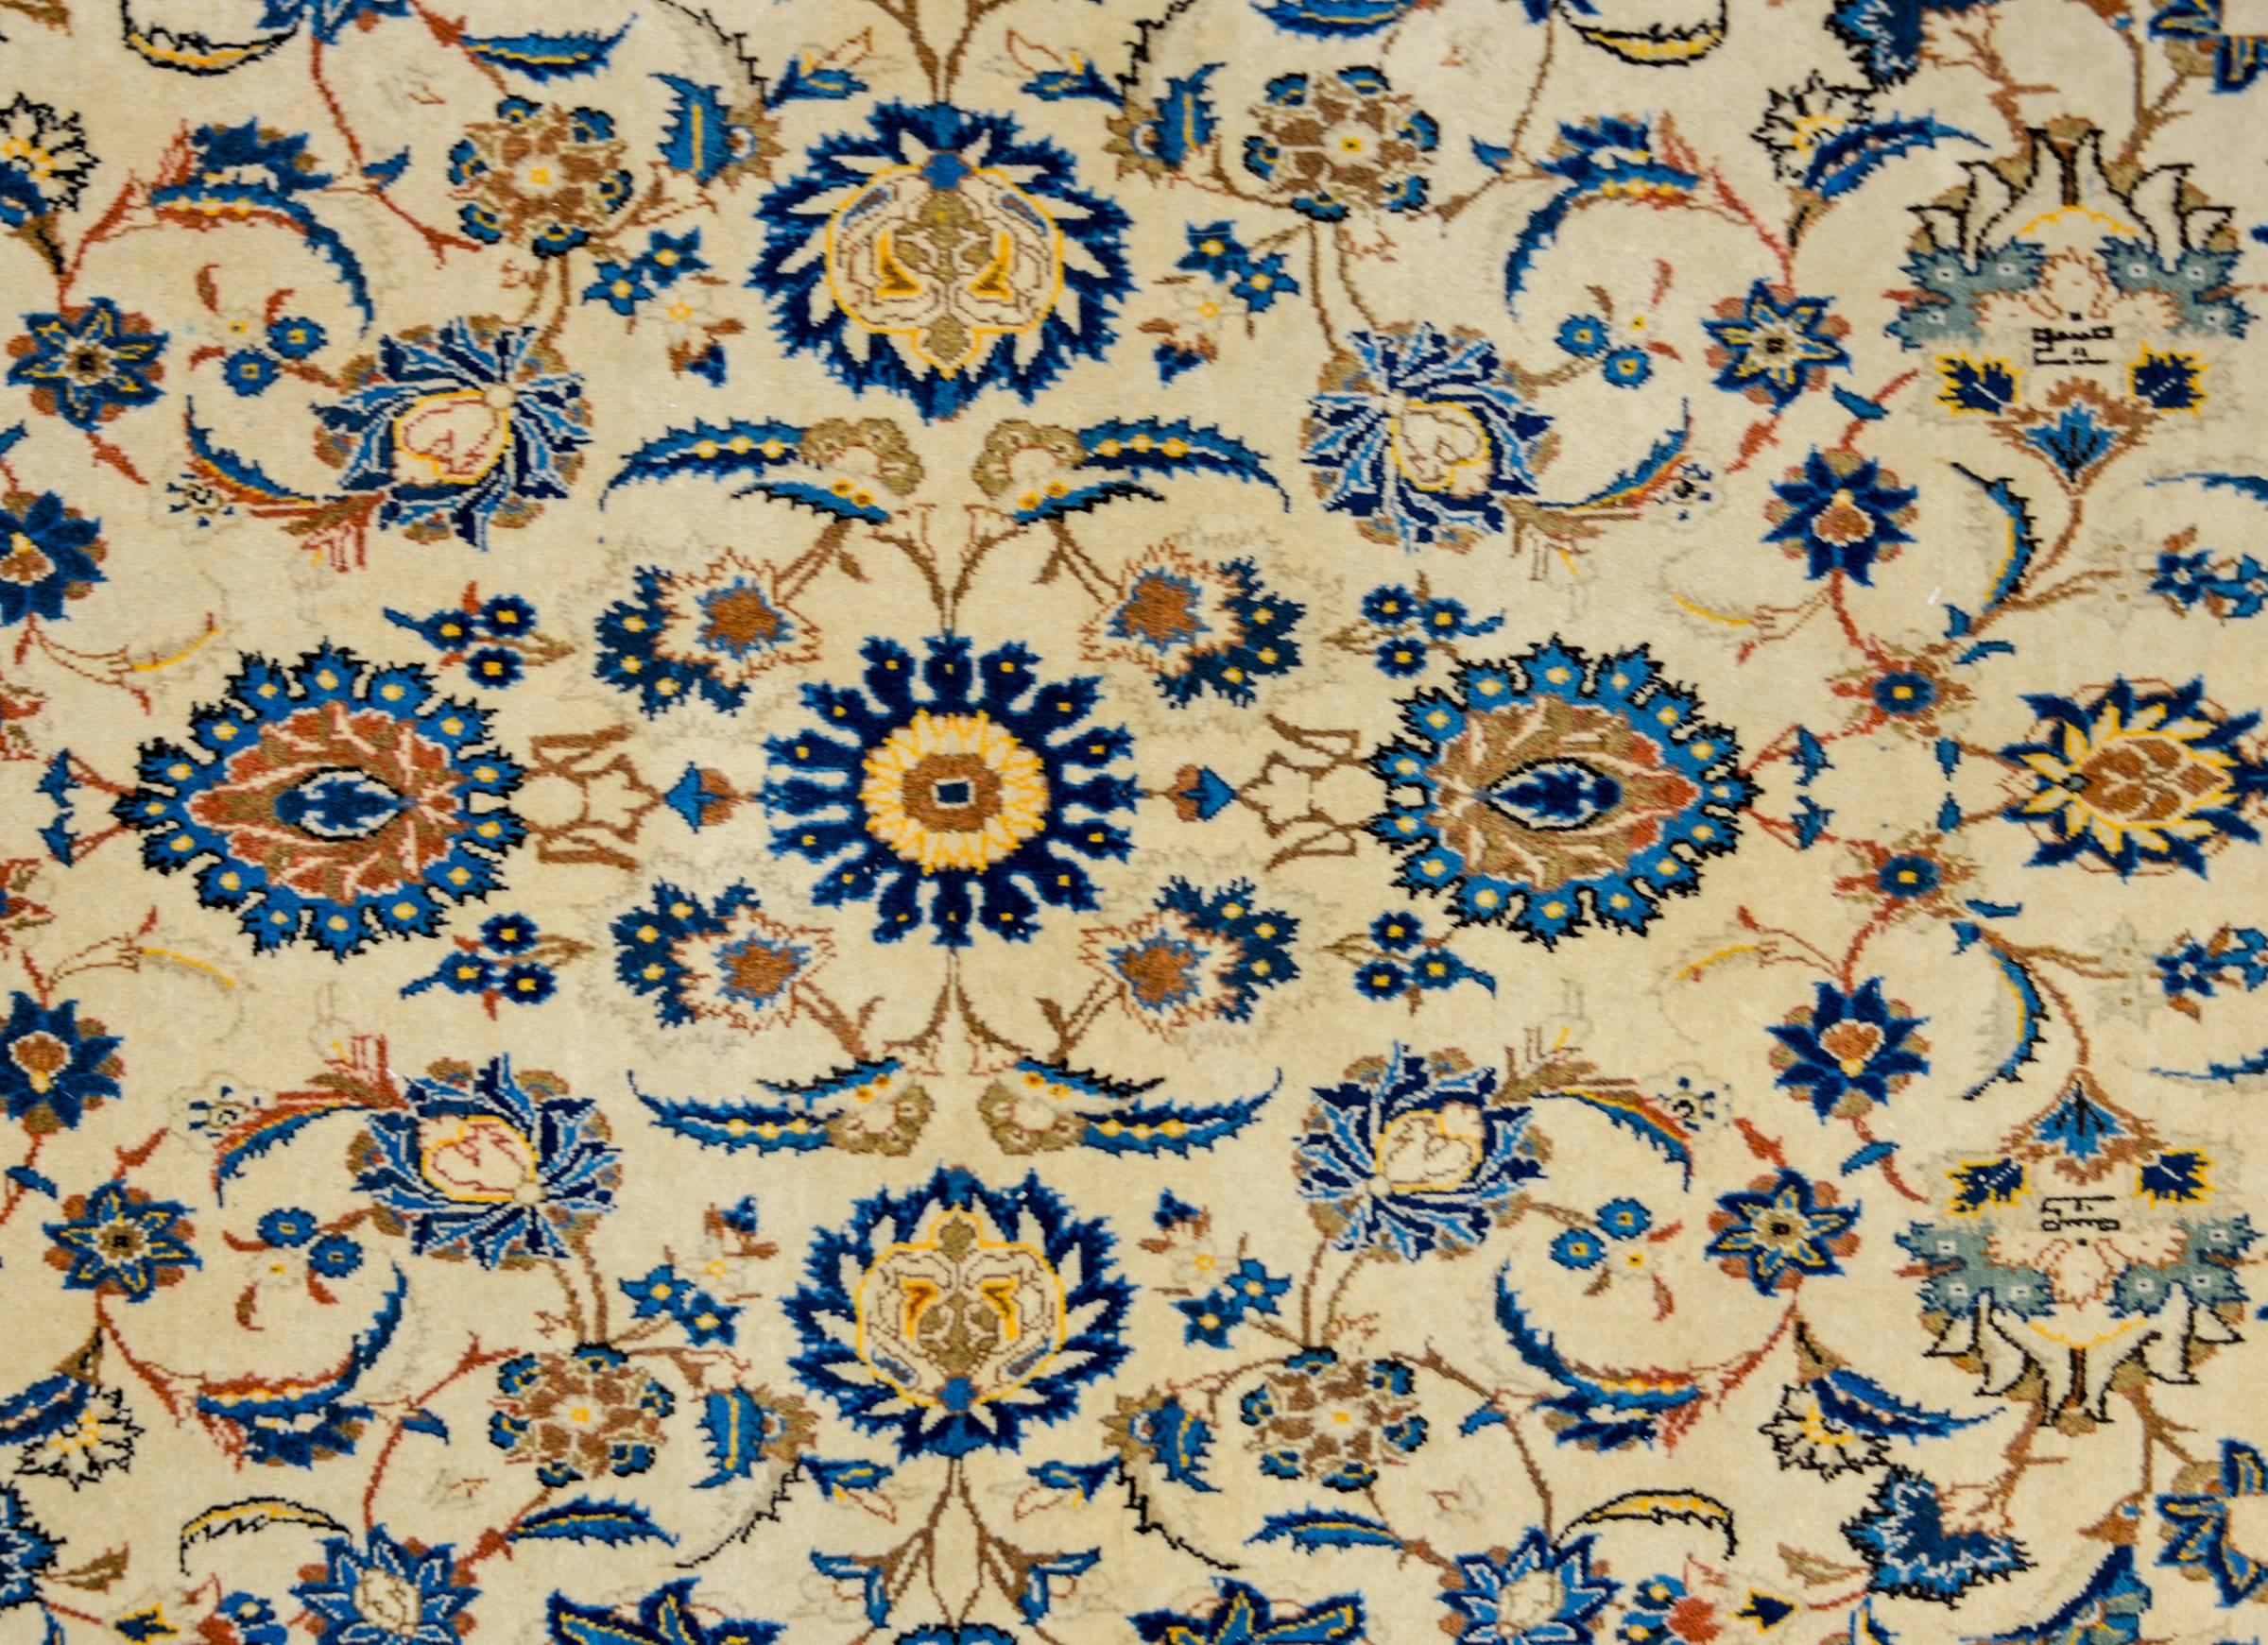 A fantastic early 20th century Persian Kashan rug with a wonderful all-over mirrored floral and vine pattern woven in light and dark indigo, gold, and brown vegetable dyed wool, on a cream colored wool background. The border is complimentary, woven